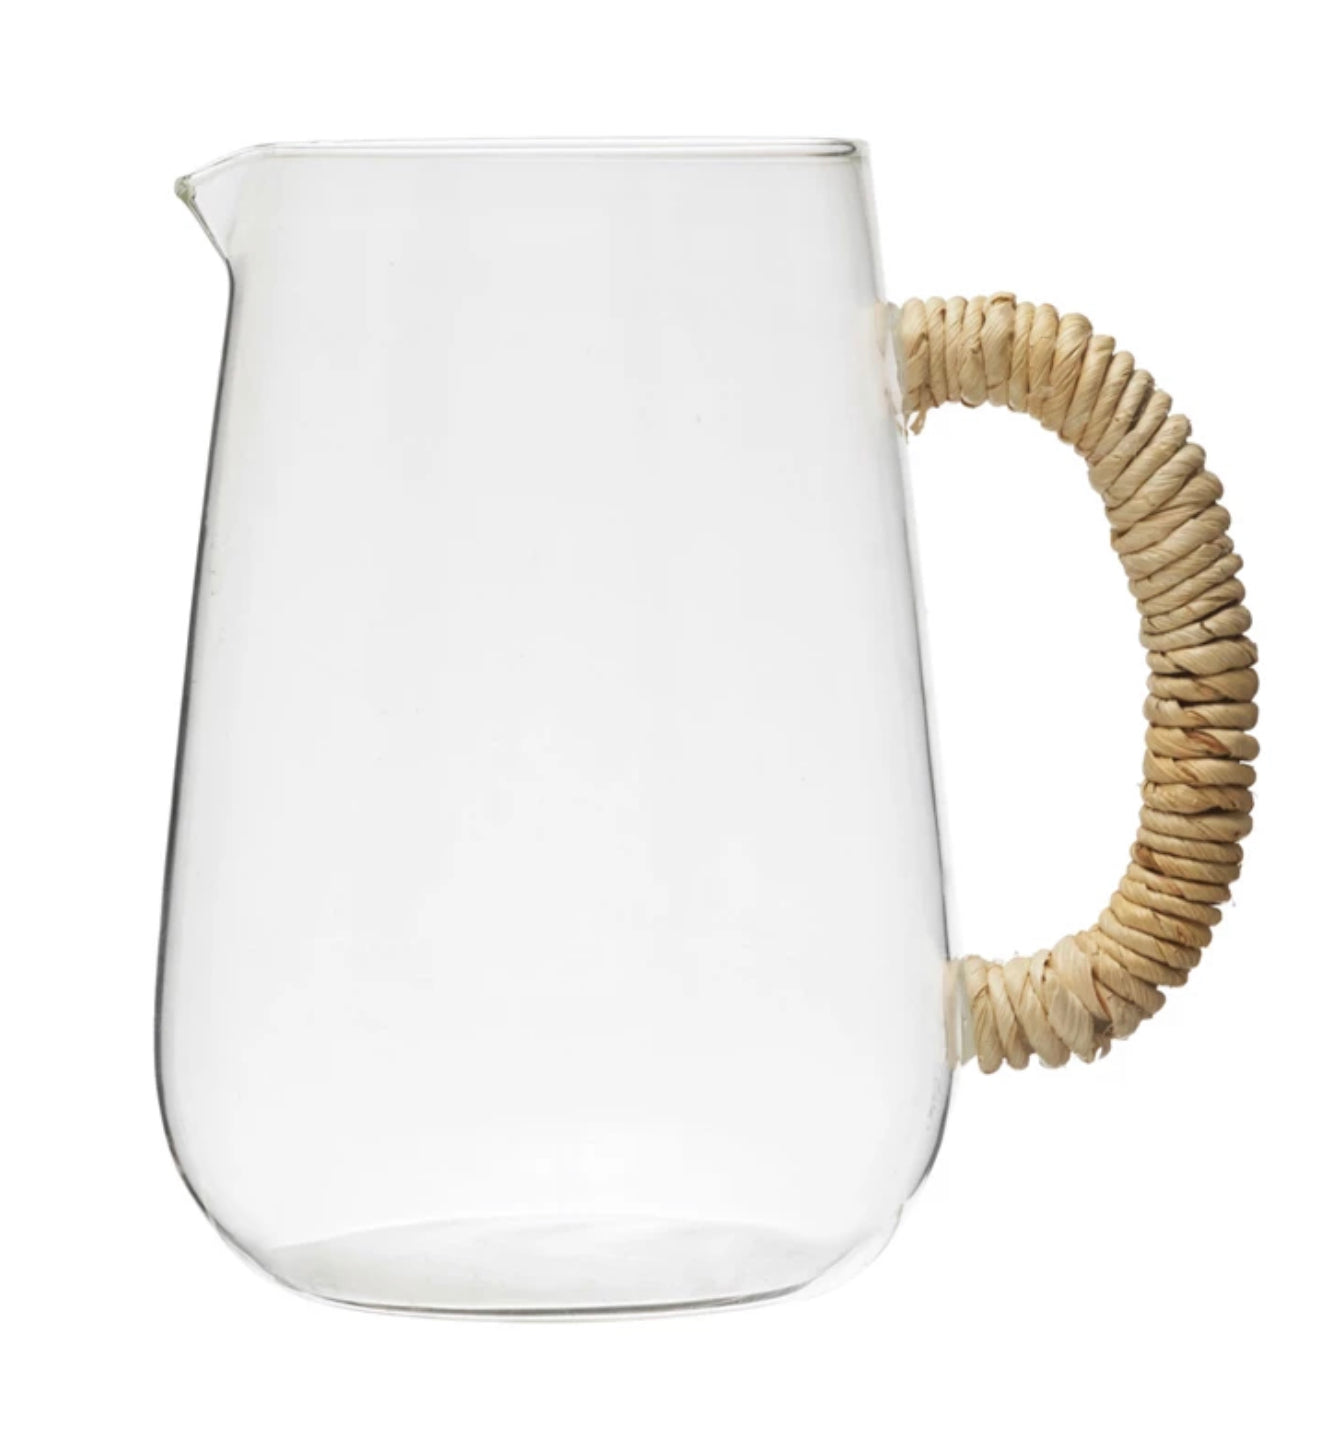 48 oz. Glass Pitcher w/ Natural Wrapped Handle